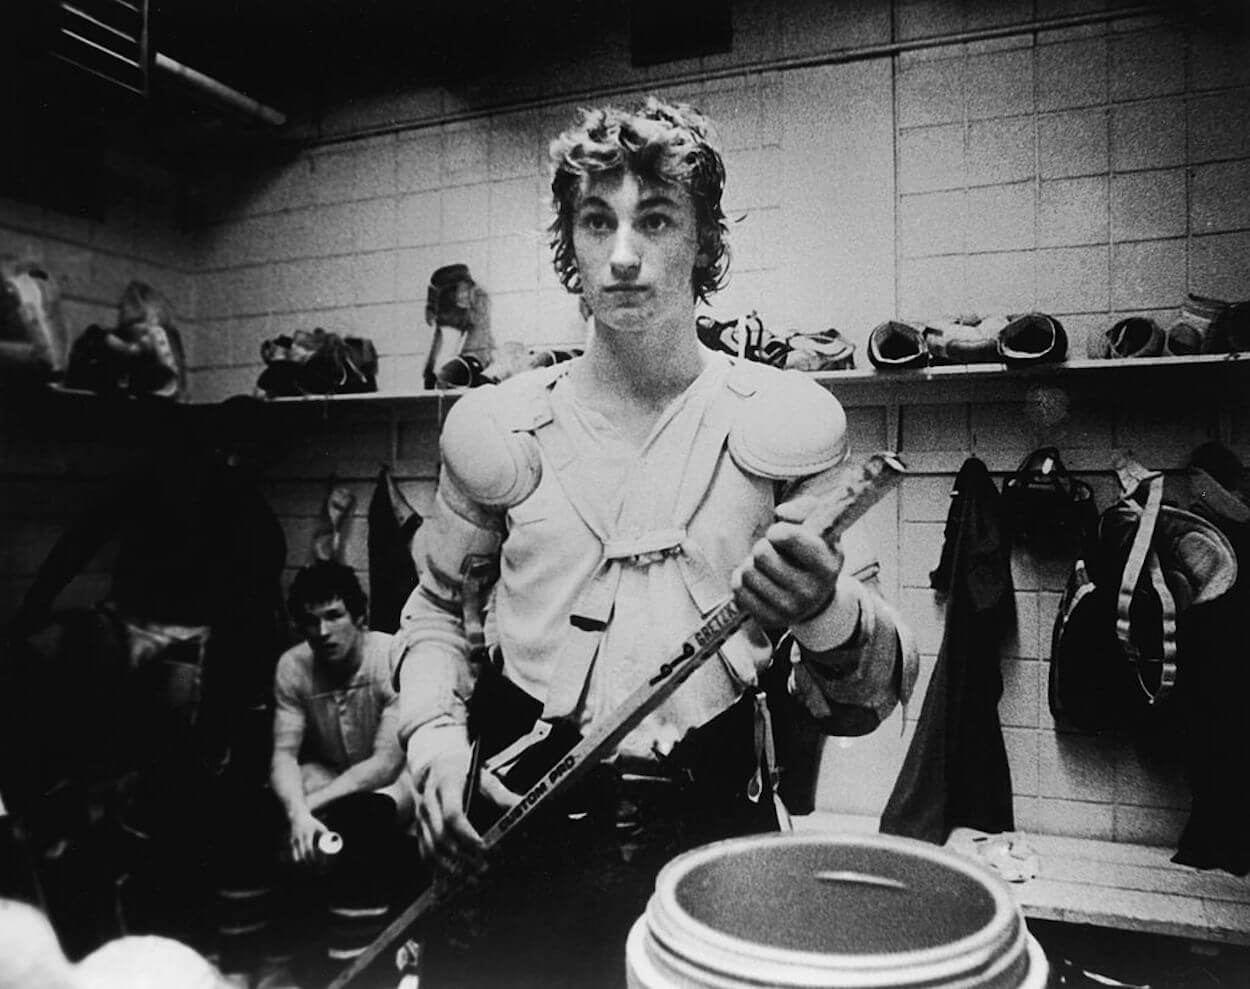 A young Wayne Gretzky in the locker room after his final World Hockey Association game.